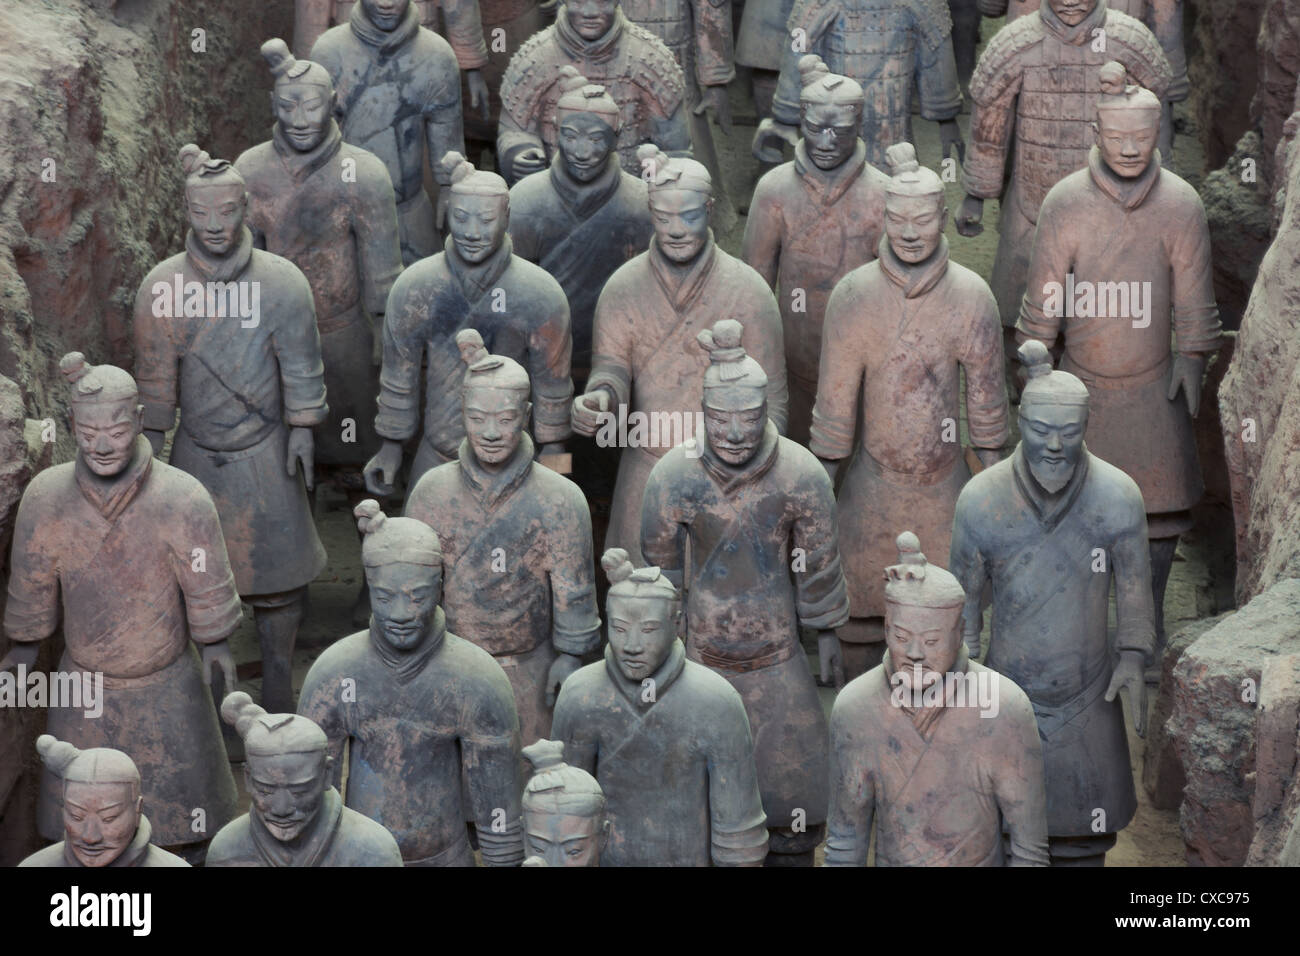 China,sculpture,Protection,Mausoleum,Neat，Indoors, Tomb, samurai,terracotta, ancient civilization,clay,Antiquities,pottery,Army Stock Photo